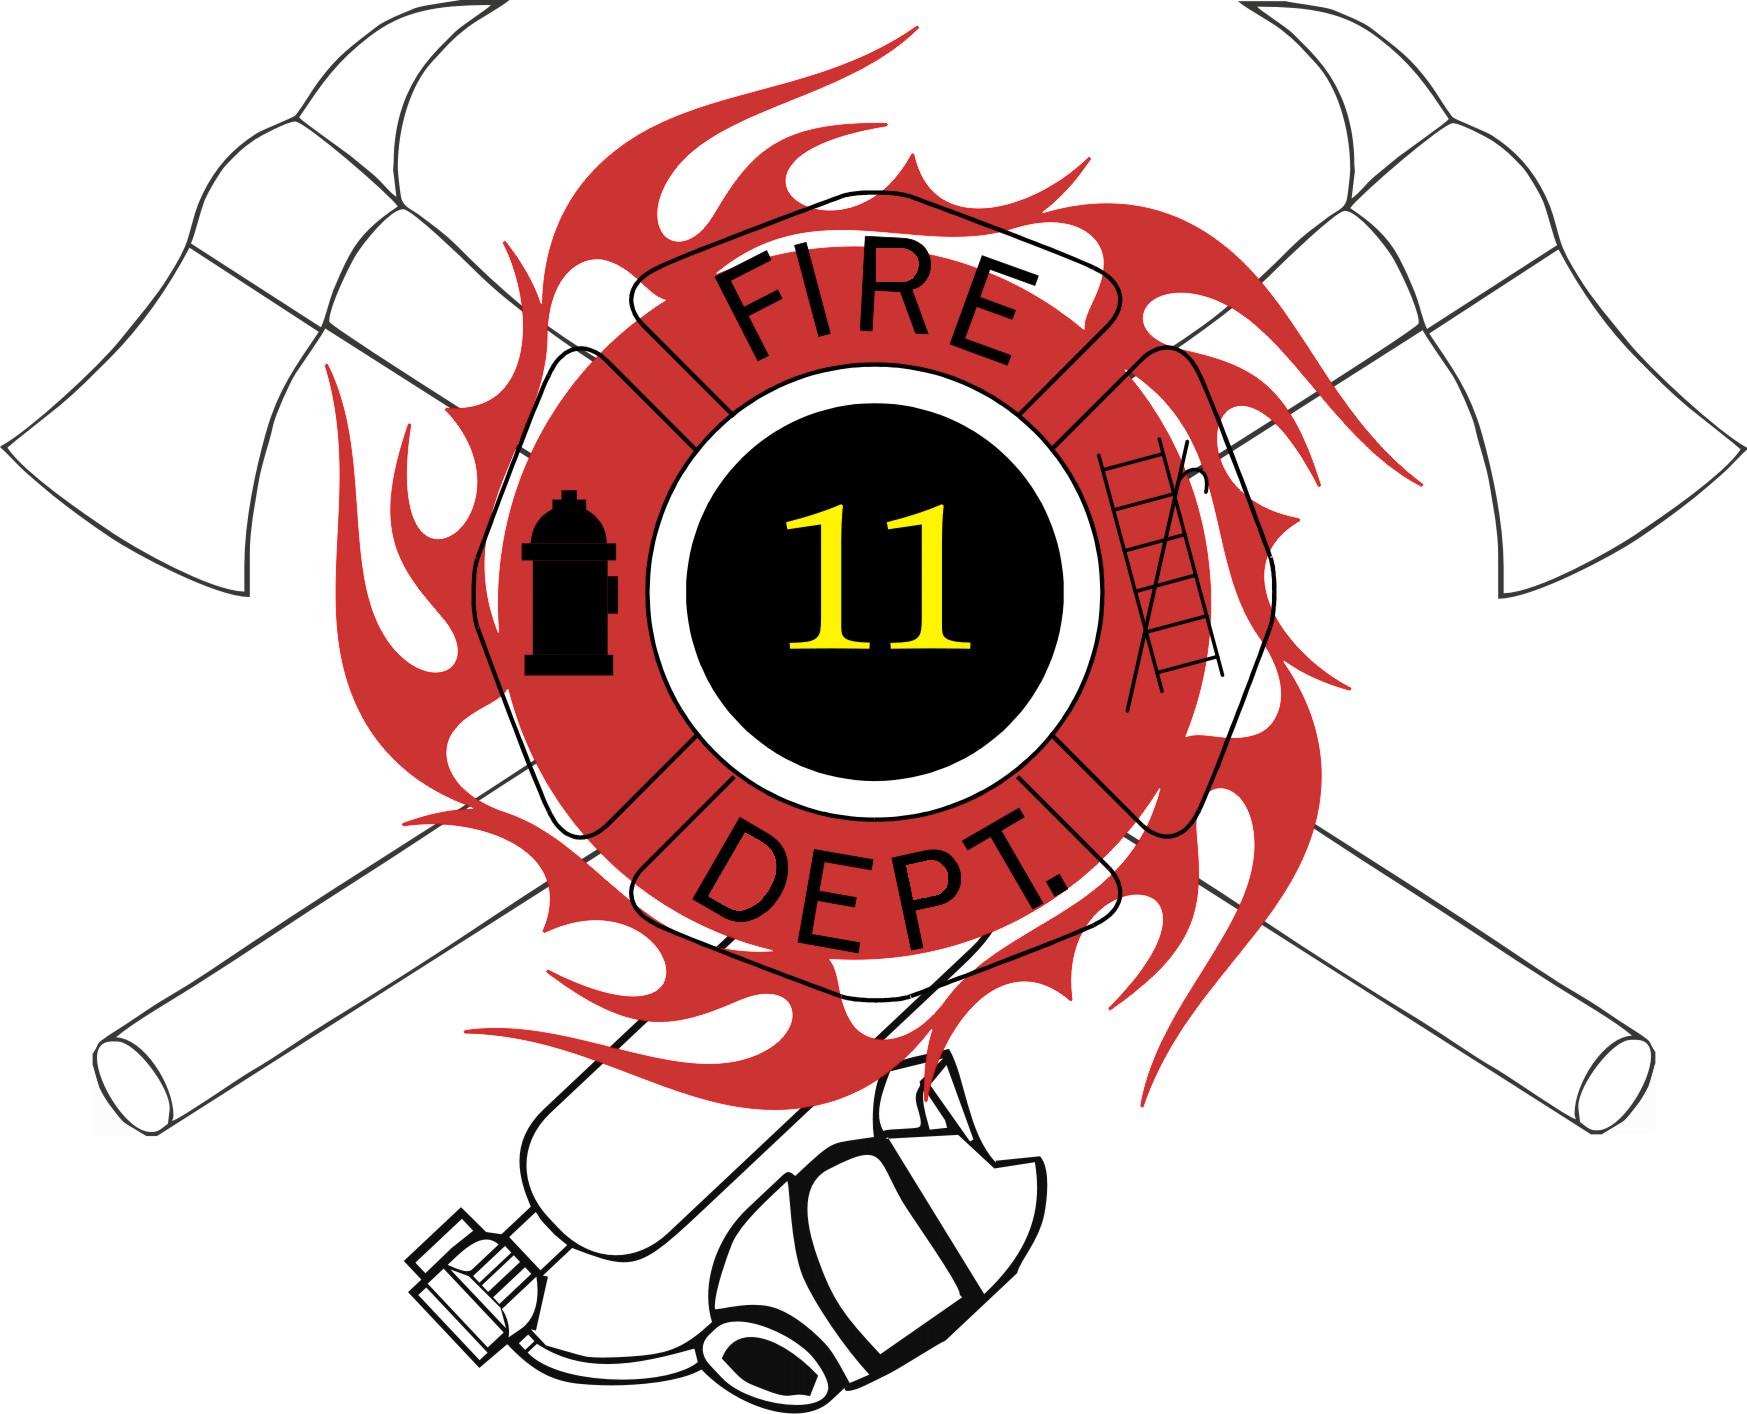 Firefighter Logo Clip Art Images  Pictures - Becuo